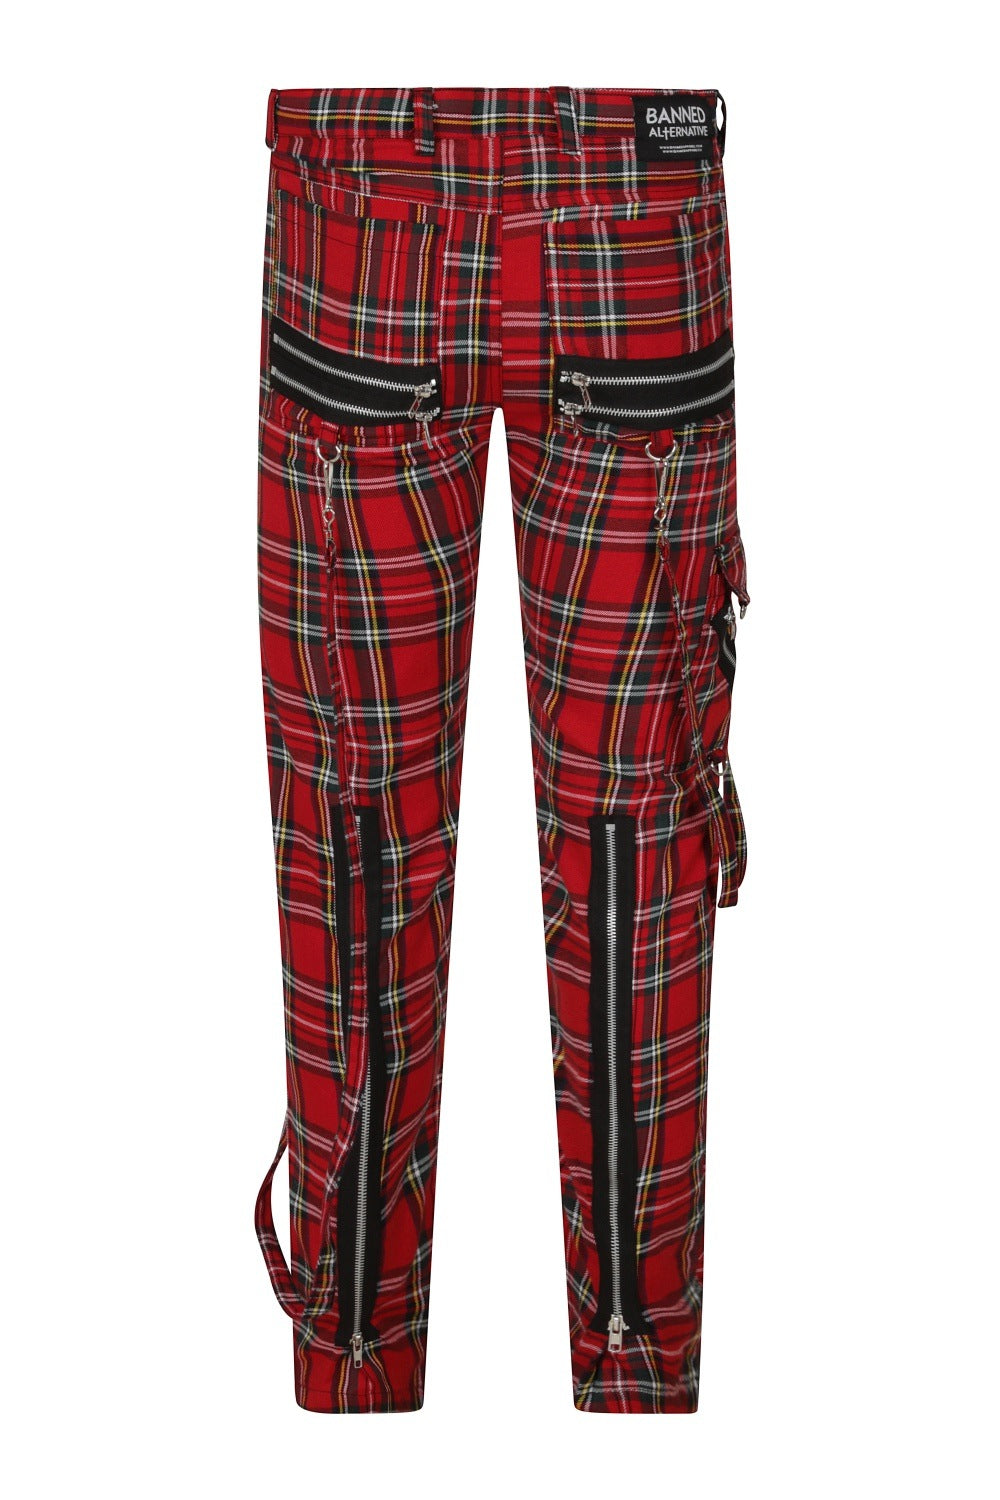 Back of red tartan trousers with strap and zip details 